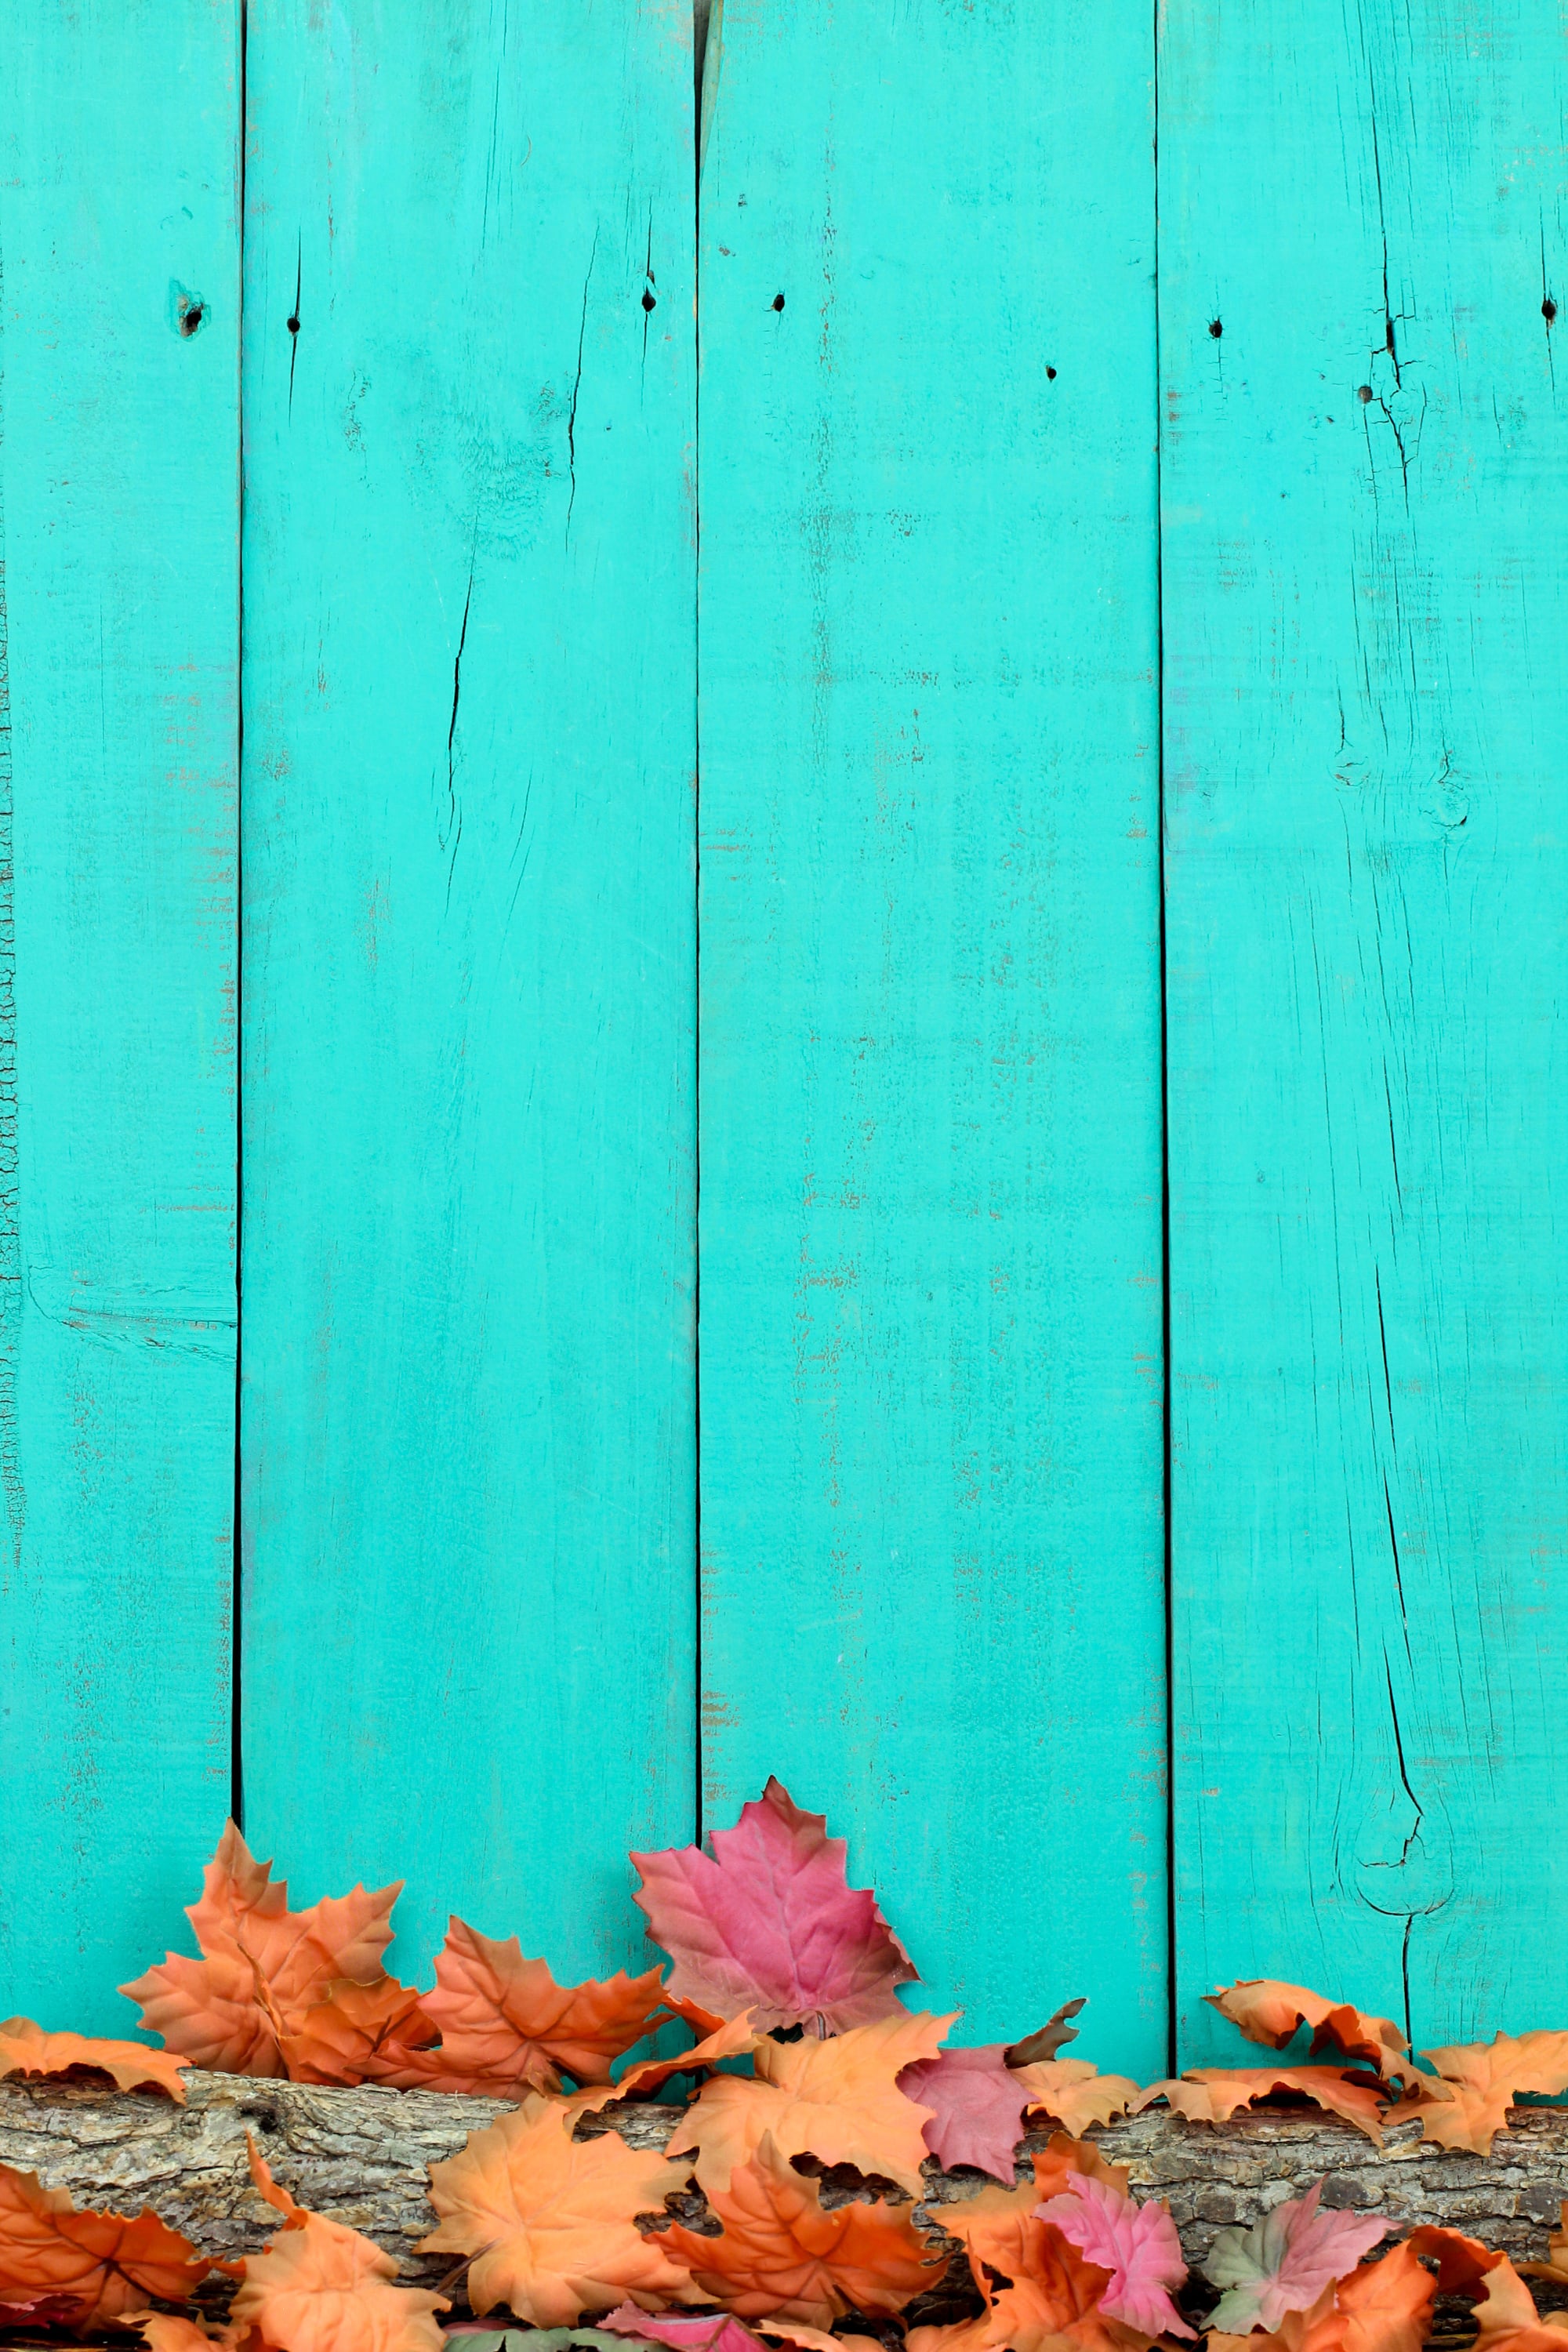 Creative Minimalist Style Autumn Autumn Outdoor Poster Background Wallpaper  Image For Free Download  Pngtree